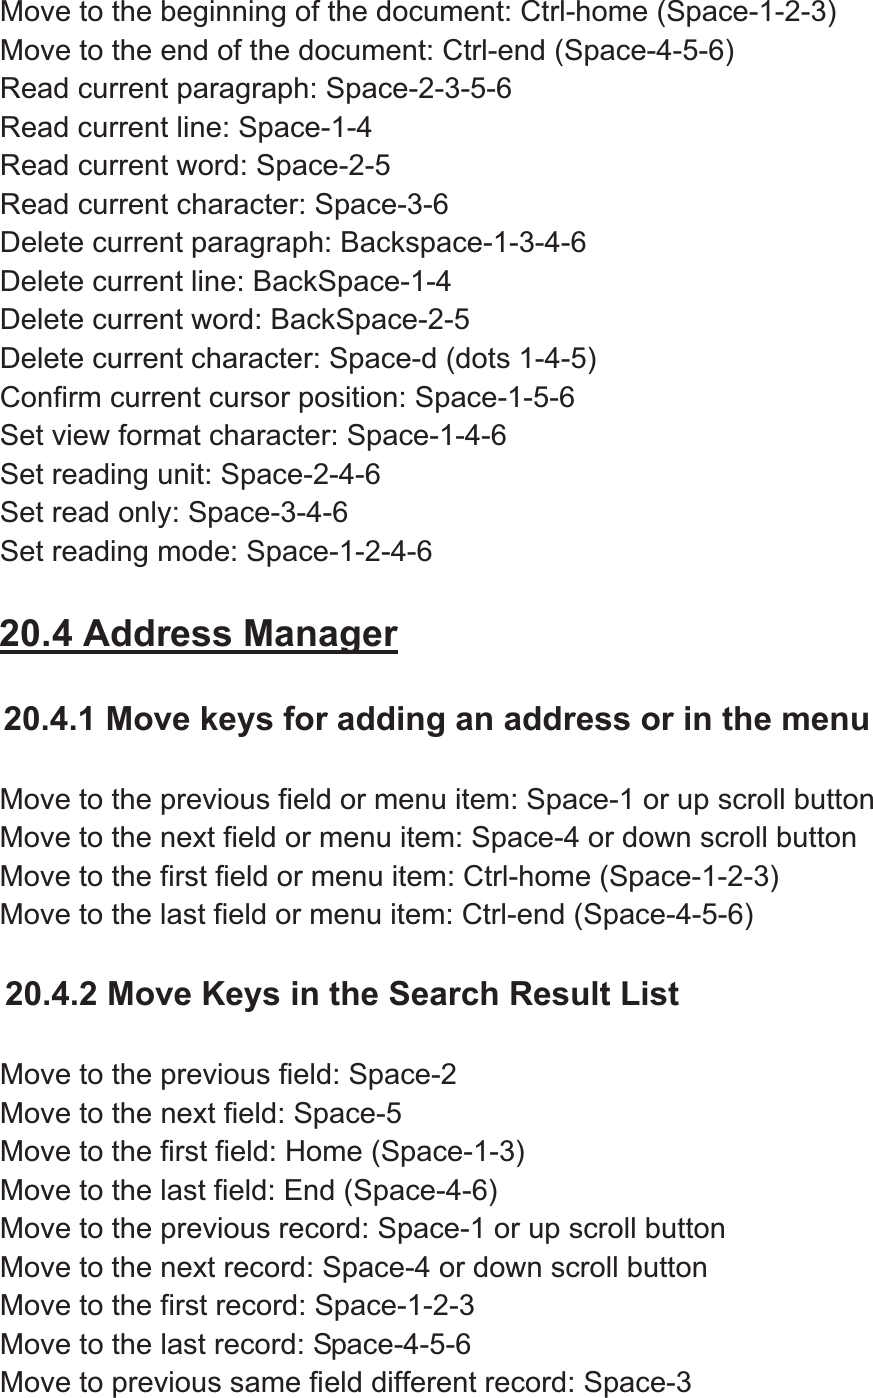 Move to the beginning of the document: Ctrl-home (Space-1-2-3) Move to the end of the document: Ctrl-end (Space-4-5-6) Read current paragraph: Space-2-3-5-6 Read current line: Space-1-4 Read current word: Space-2-5 Read current character: Space-3-6 Delete current paragraph: Backspace-1-3-4-6 Delete current line: BackSpace-1-4 Delete current word: BackSpace-2-5 Delete current character: Space-d (dots 1-4-5) Confirm current cursor position: Space-1-5-6 Set view format character: Space-1-4-6 Set reading unit: Space-2-4-6 Set read only: Space-3-4-6 Set reading mode: Space-1-2-4-6 20.4 Address Manager20.4.1 Move keys for adding an address or in the menu Move to the previous field or menu item: Space-1 or up scroll button Move to the next field or menu item: Space-4 or down scroll button Move to the first field or menu item: Ctrl-home (Space-1-2-3) Move to the last field or menu item: Ctrl-end (Space-4-5-6) 20.4.2 Move Keys in the Search Result List Move to the previous field: Space-2 Move to the next field: Space-5   Move to the first field: Home (Space-1-3) Move to the last field: End (Space-4-6) Move to the previous record: Space-1 or up scroll button Move to the next record: Space-4 or down scroll button Move to the first record: Space-1-2-3 Move to the last record: Space-4-5-6 Move to previous same field different record: Space-3 